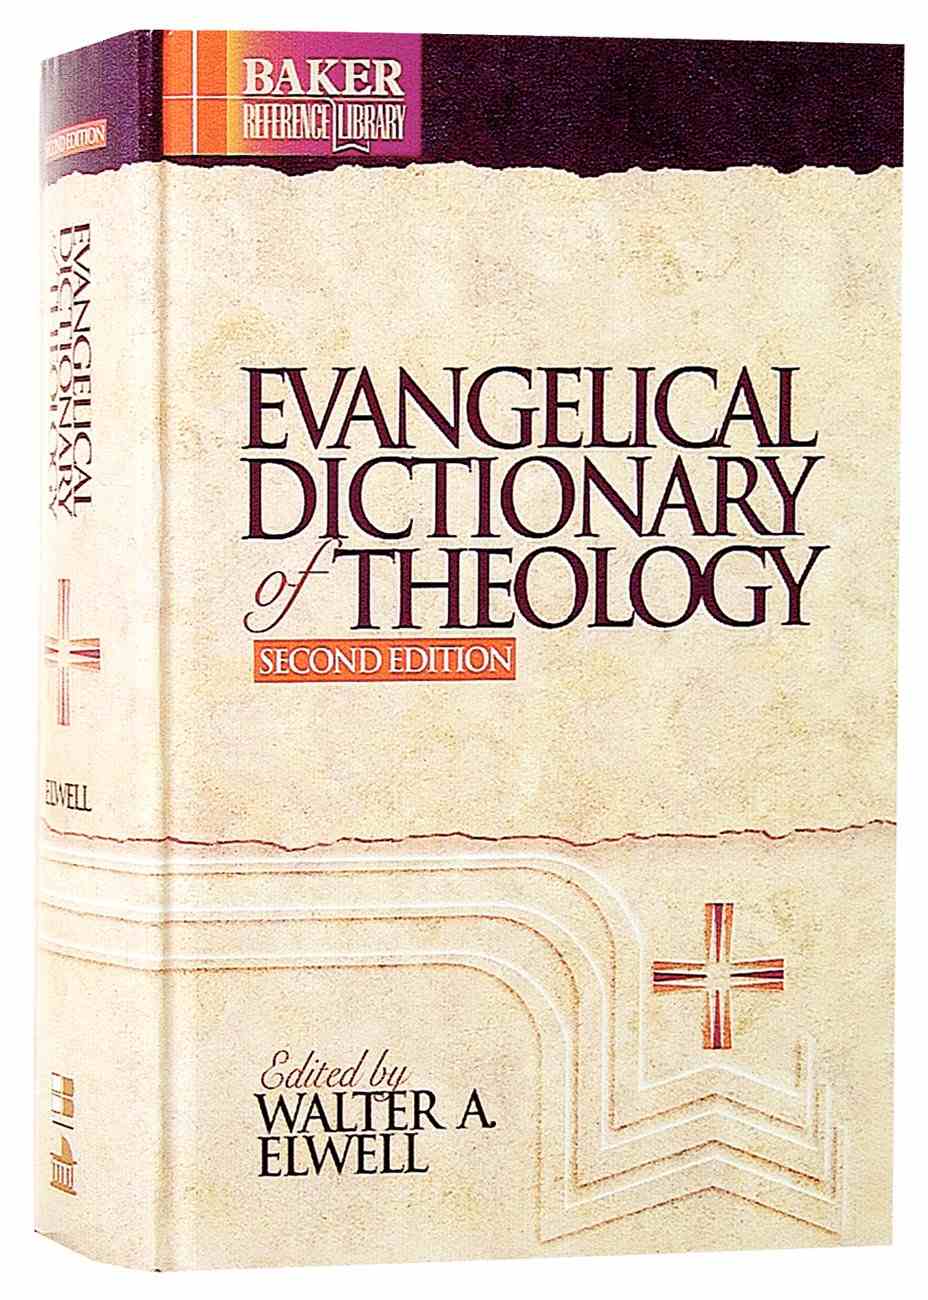 Evangelical Dictionary Of Theology 2nd Edition Baker